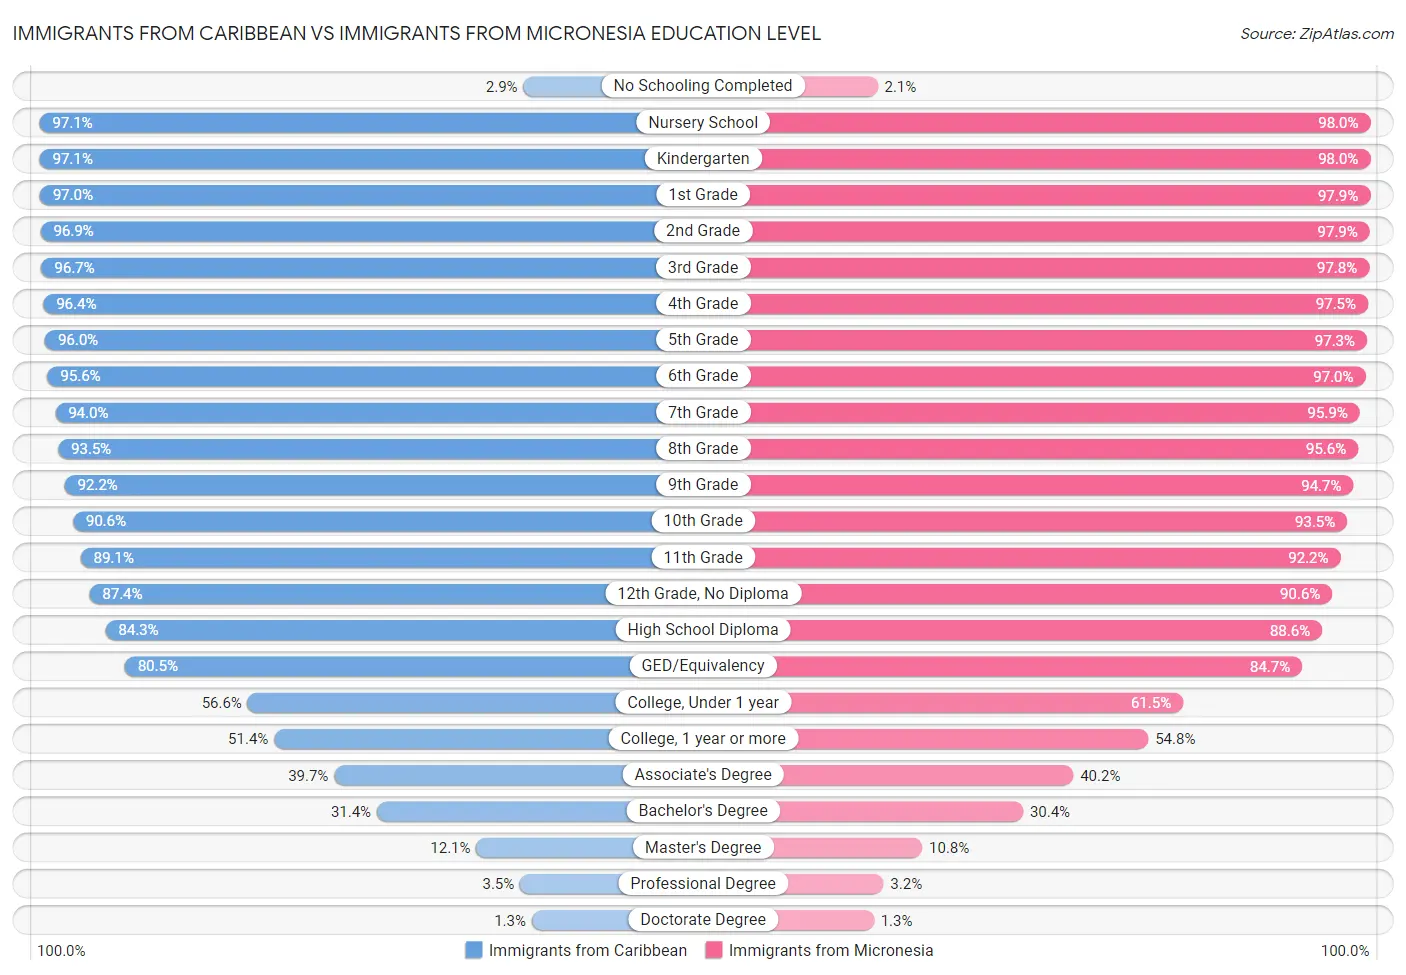 Immigrants from Caribbean vs Immigrants from Micronesia Education Level